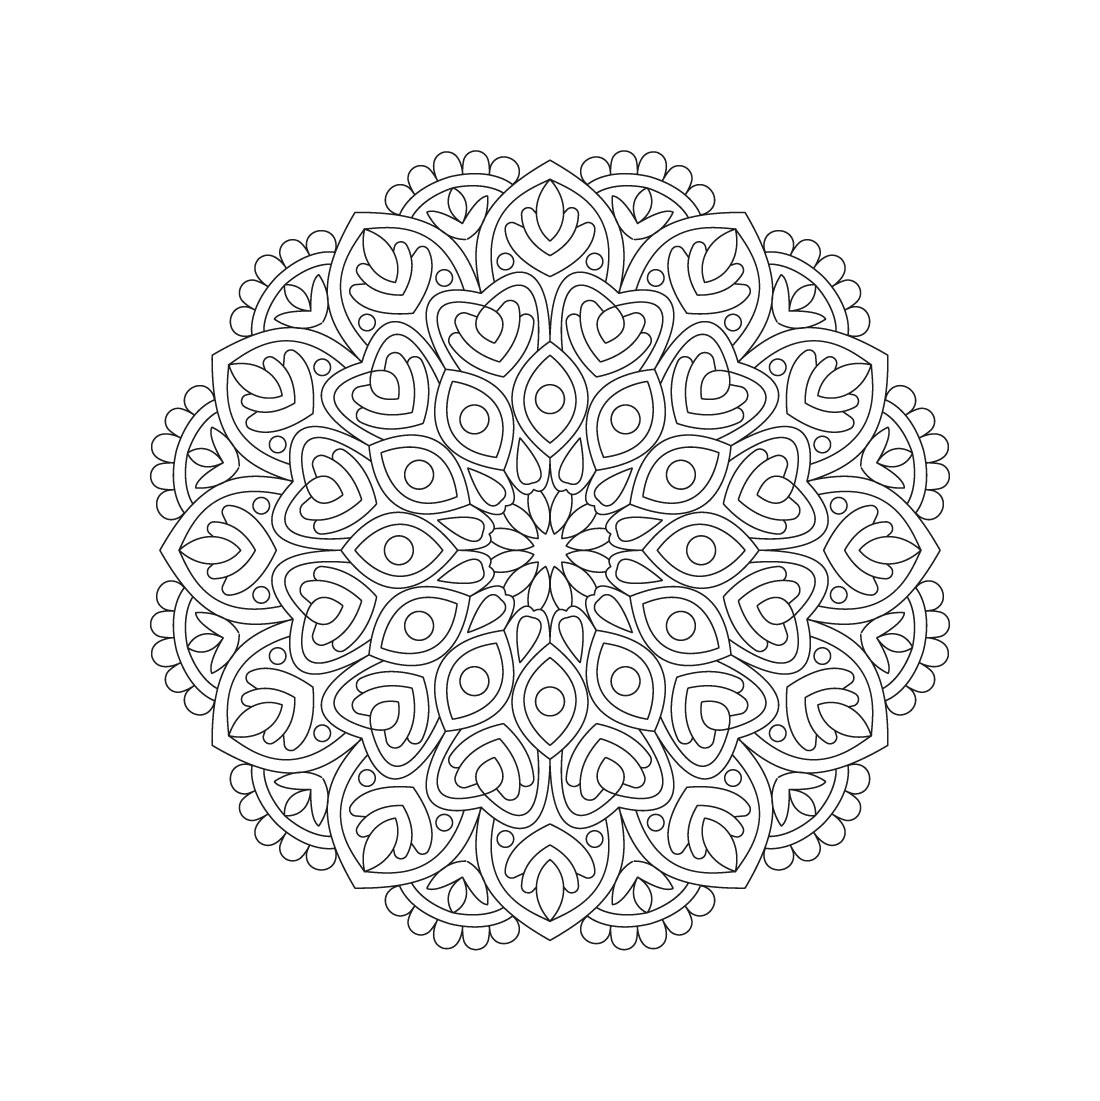 bundle of 10 tranquility mandala coloring book pages 11 73